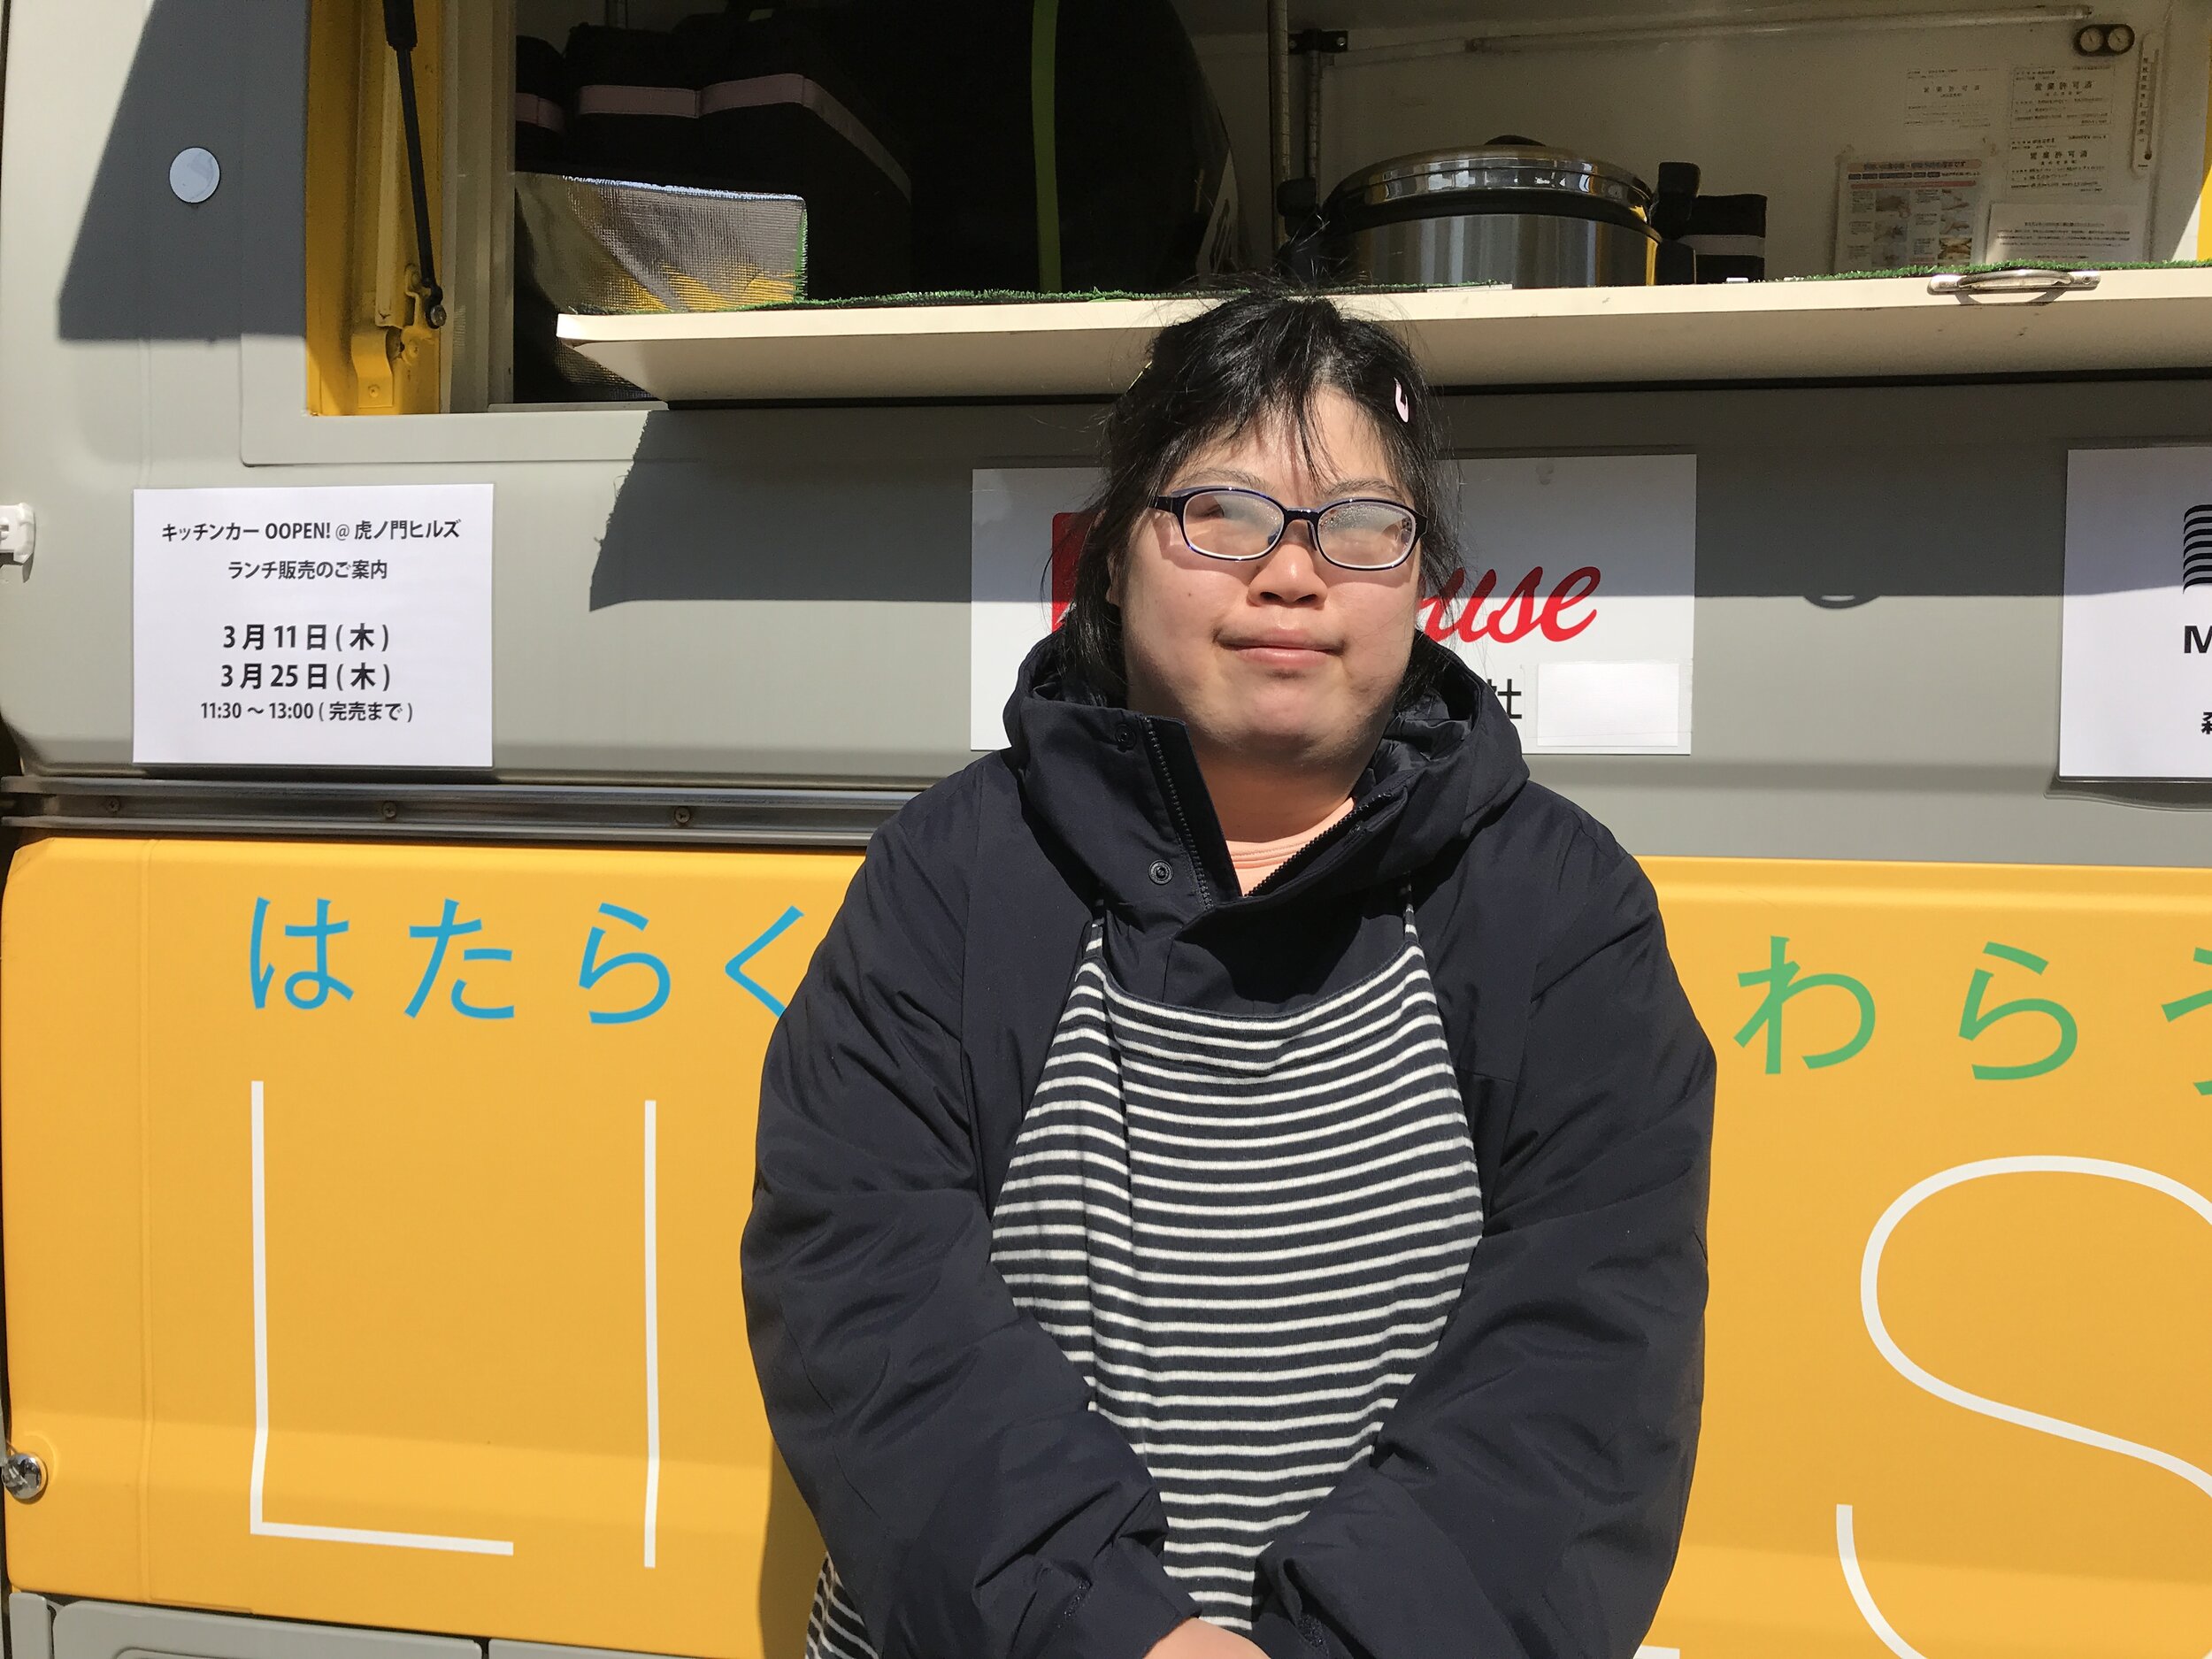 A picture of Haruka standing in front of the LIVES Food Truck